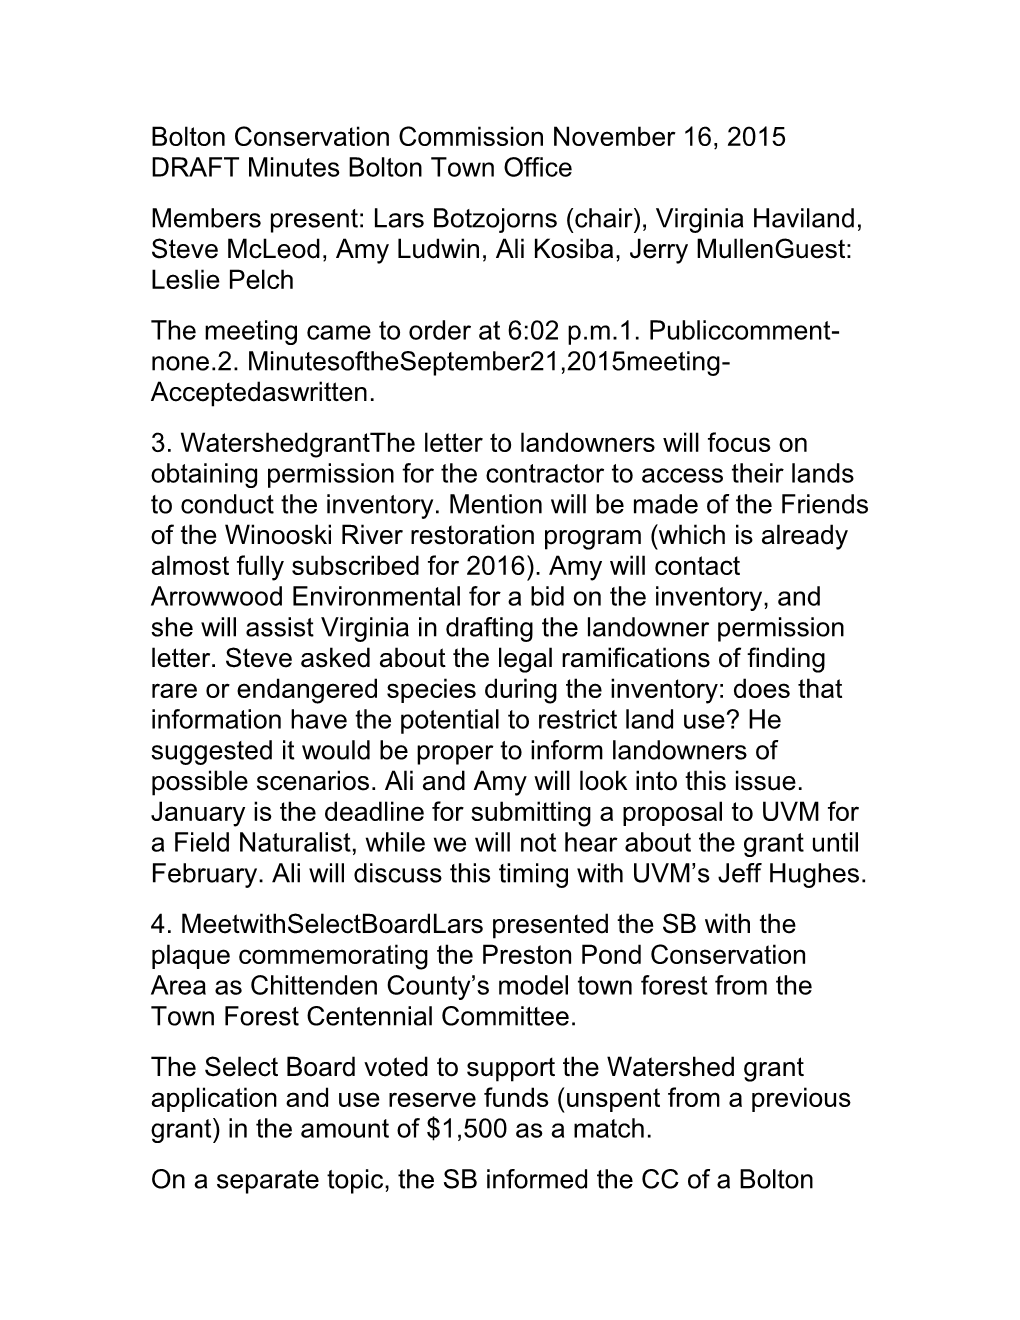 Bolton Conservation Commission November 16, 2015 DRAFT Minutes Bolton Town Office